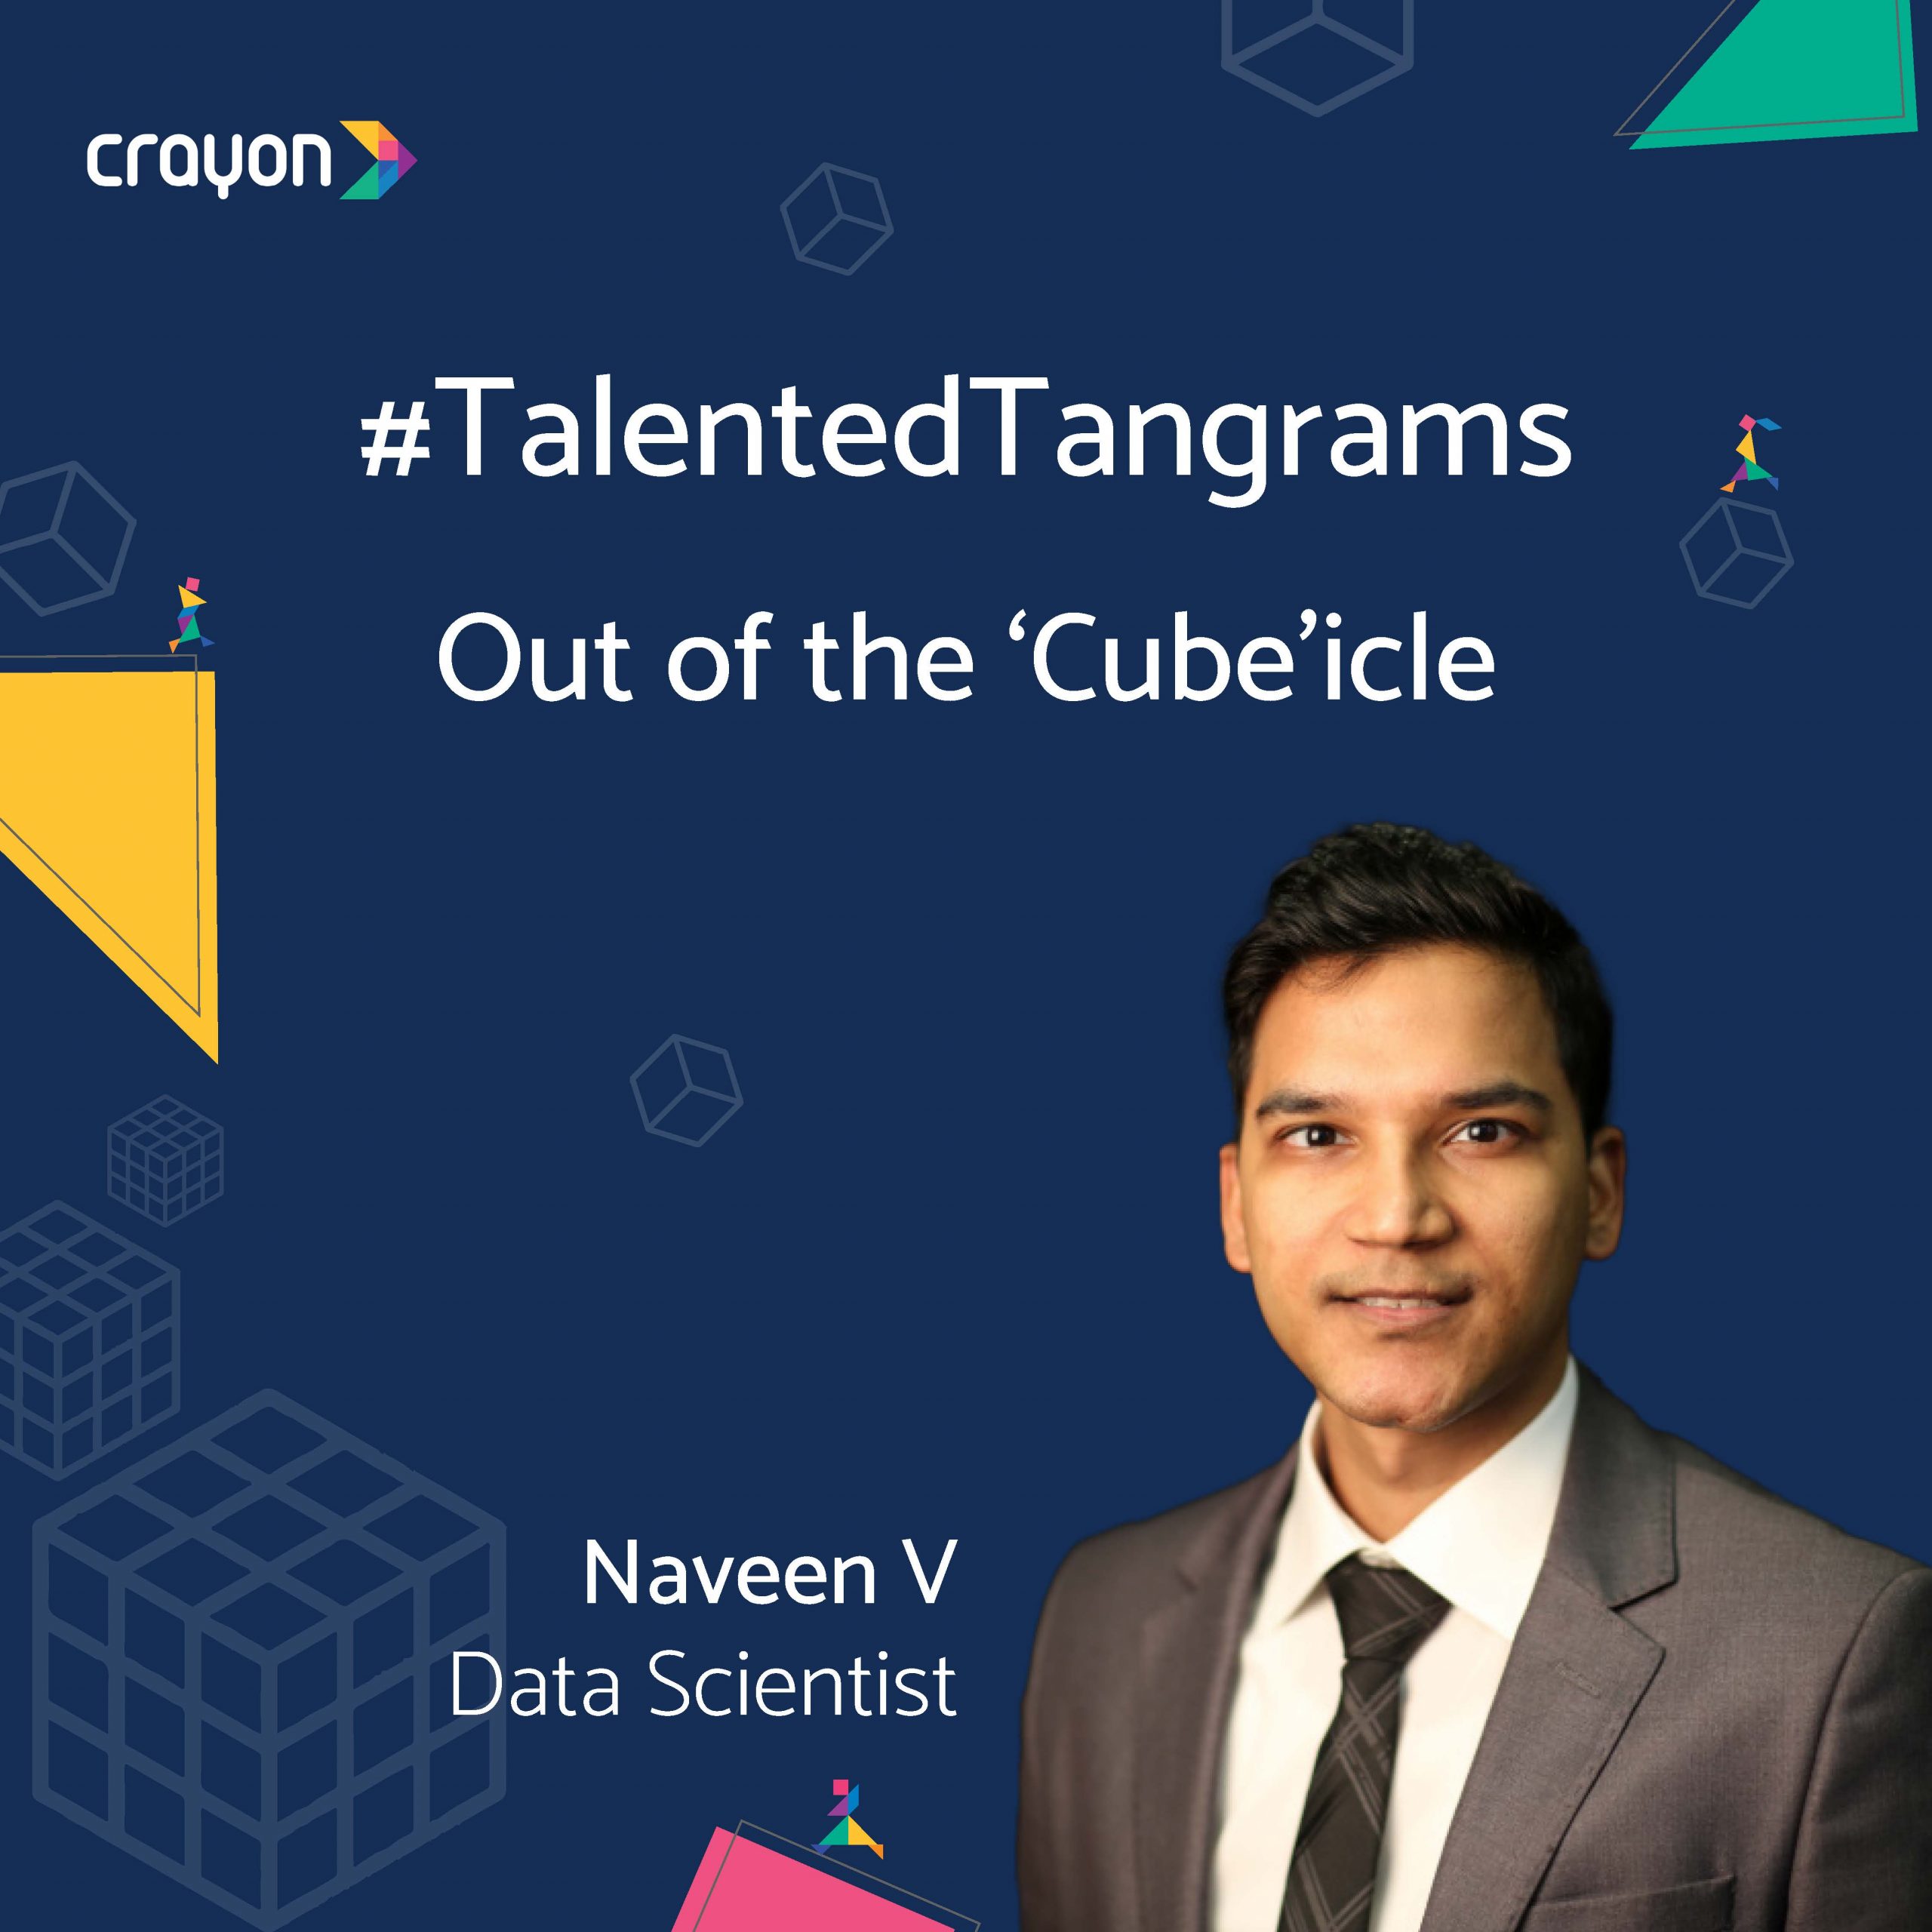 #TalentedTangrams: Out of the ‘Cube’icle with Naveen V